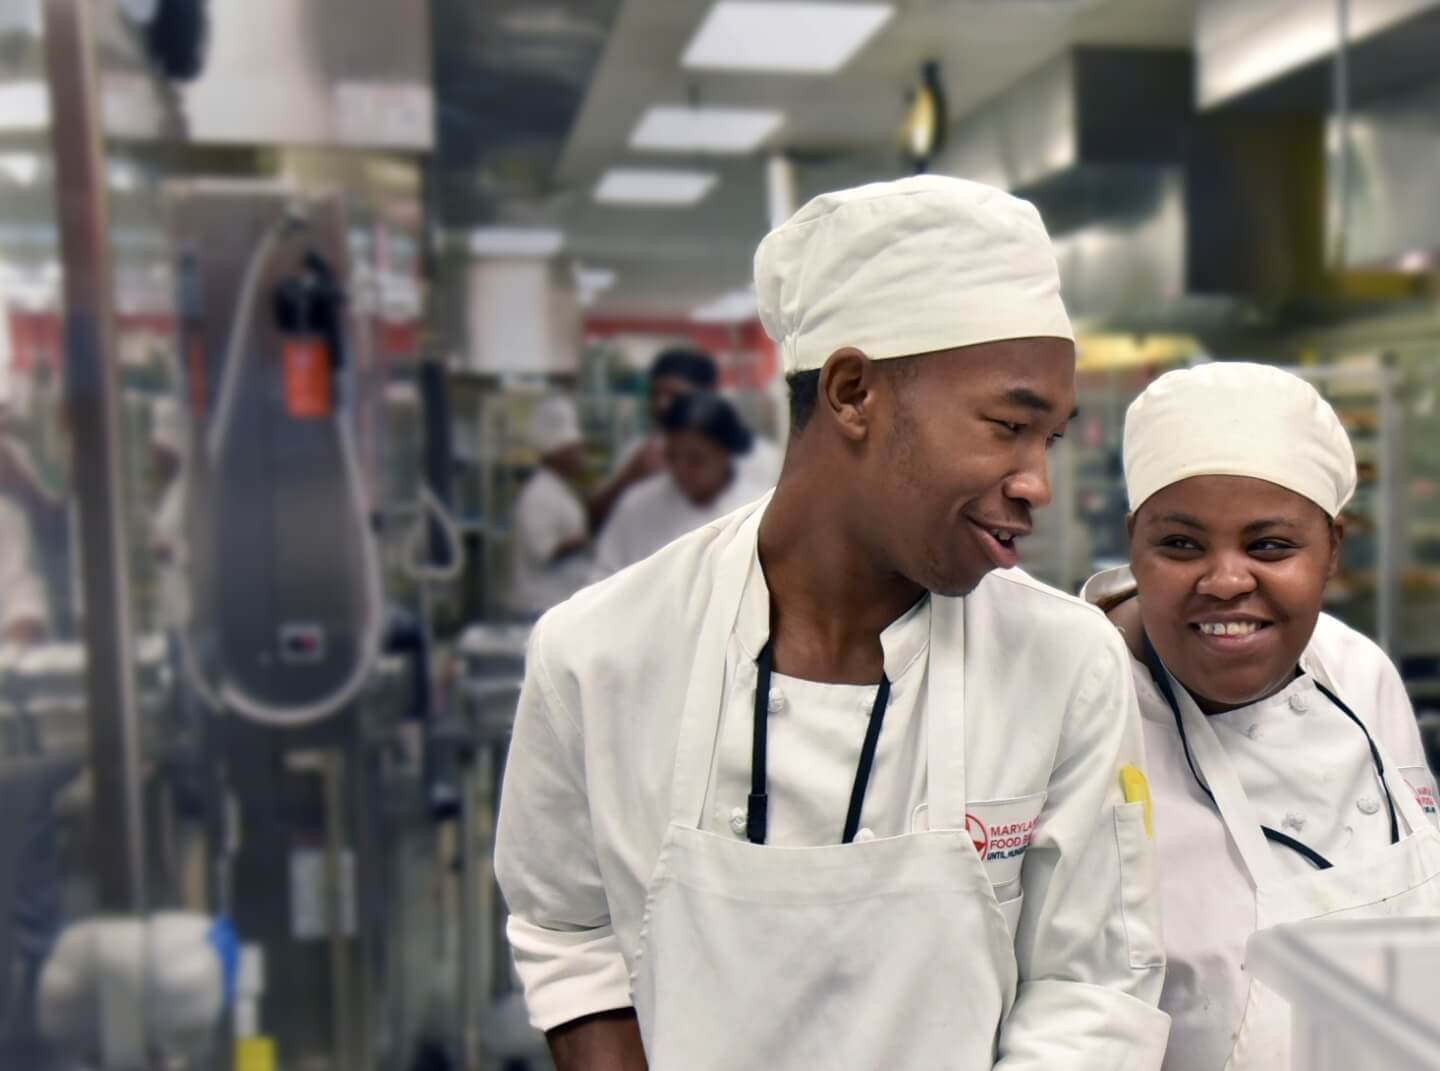 Two members of the FoodWorks training program, dressed in chef's gear, smile at each other in the teaching kitchen